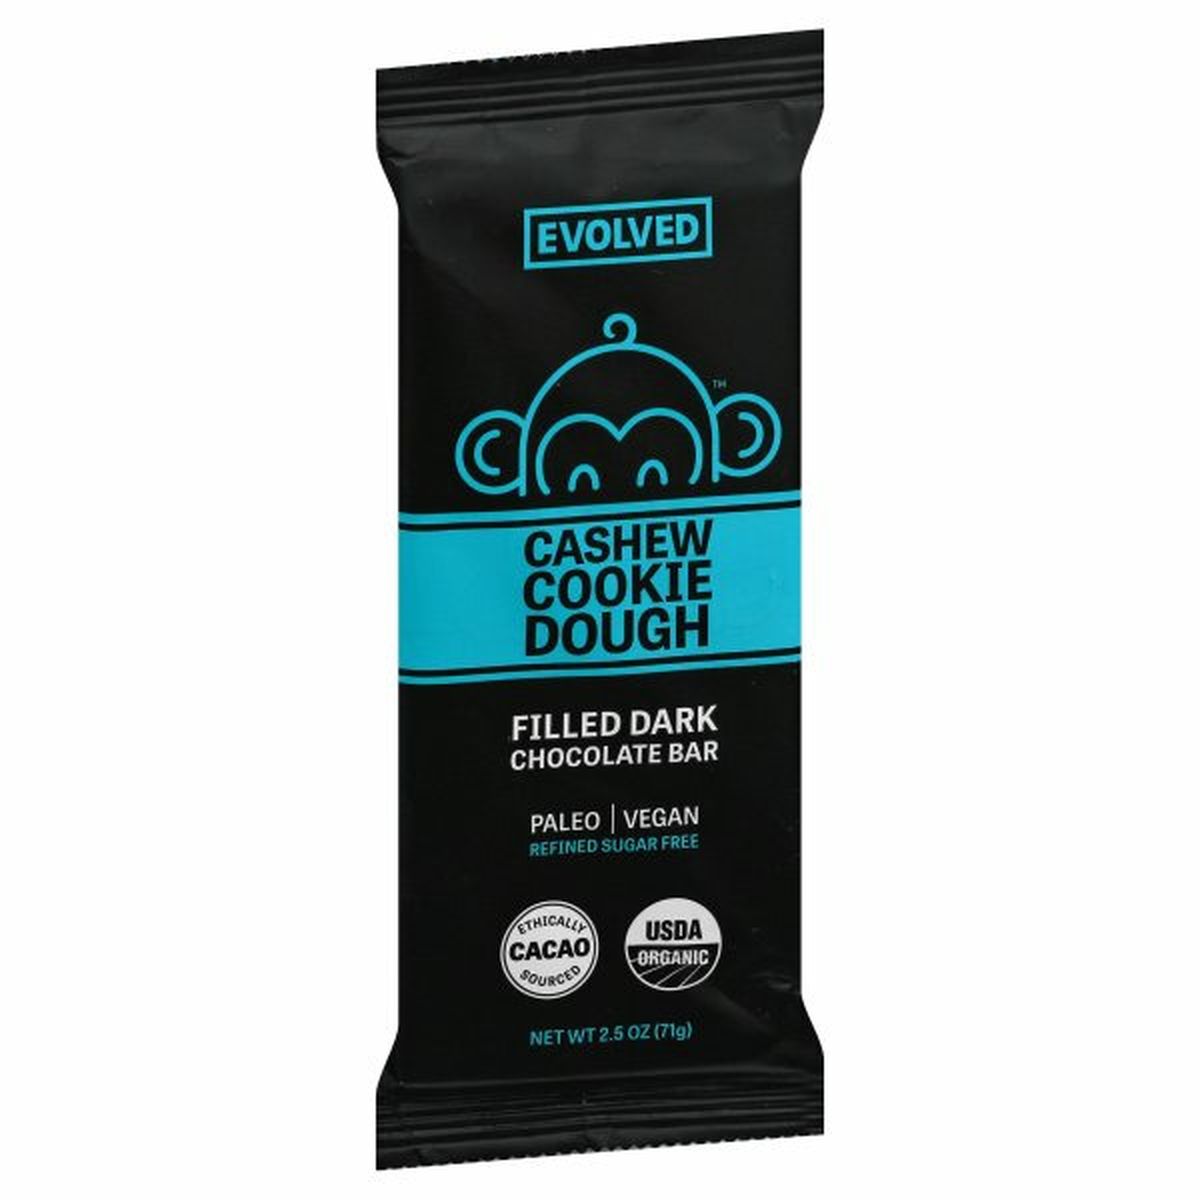 Calories in Eating Evolved Chocolate Bar, Cashew Cookie Dough